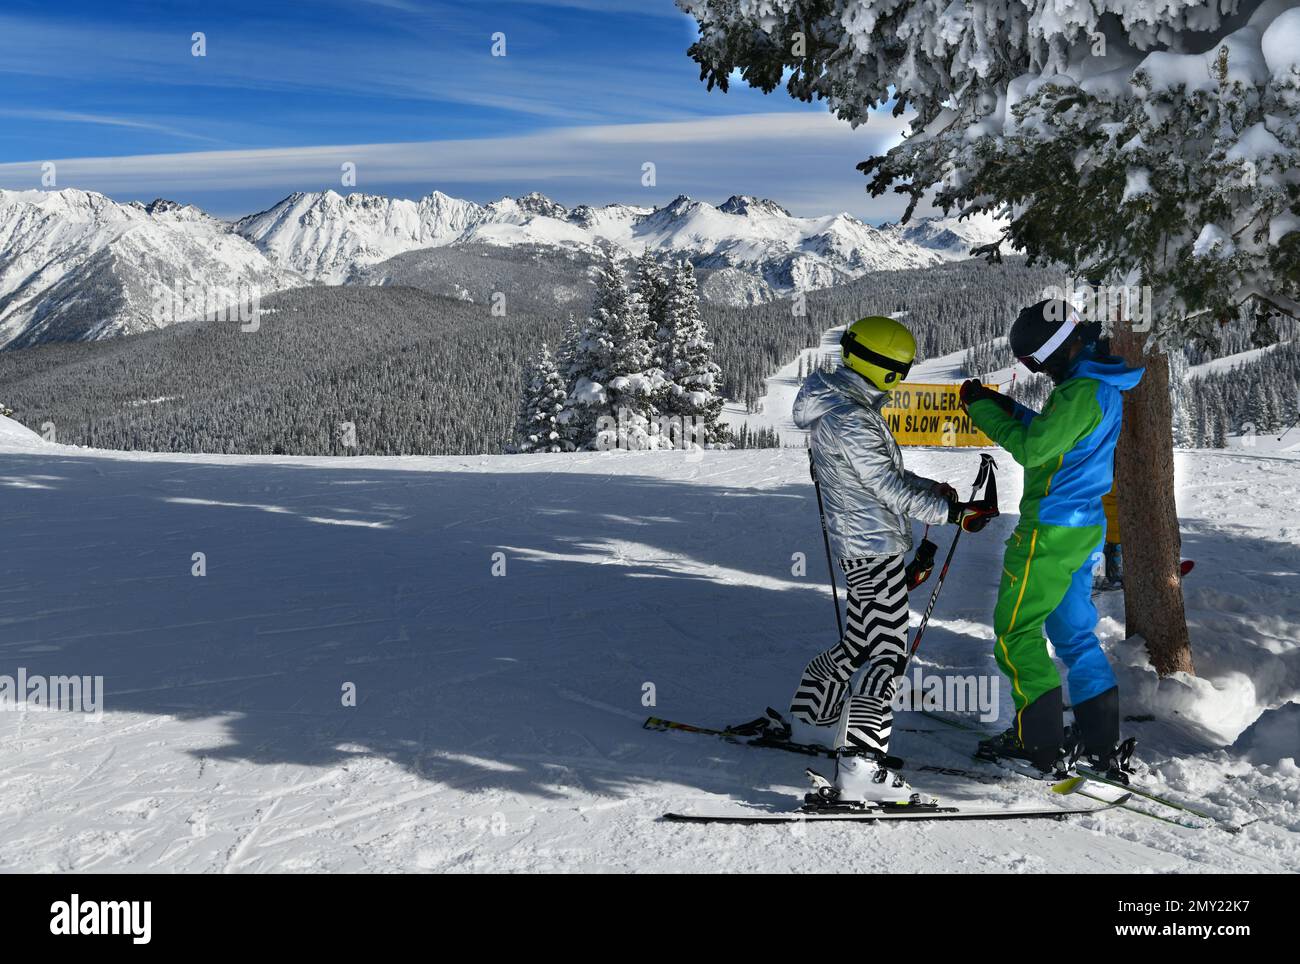 Skiers getting ready downhill at the Vail Mountain Ski Resort, Colorado. Stock Photo